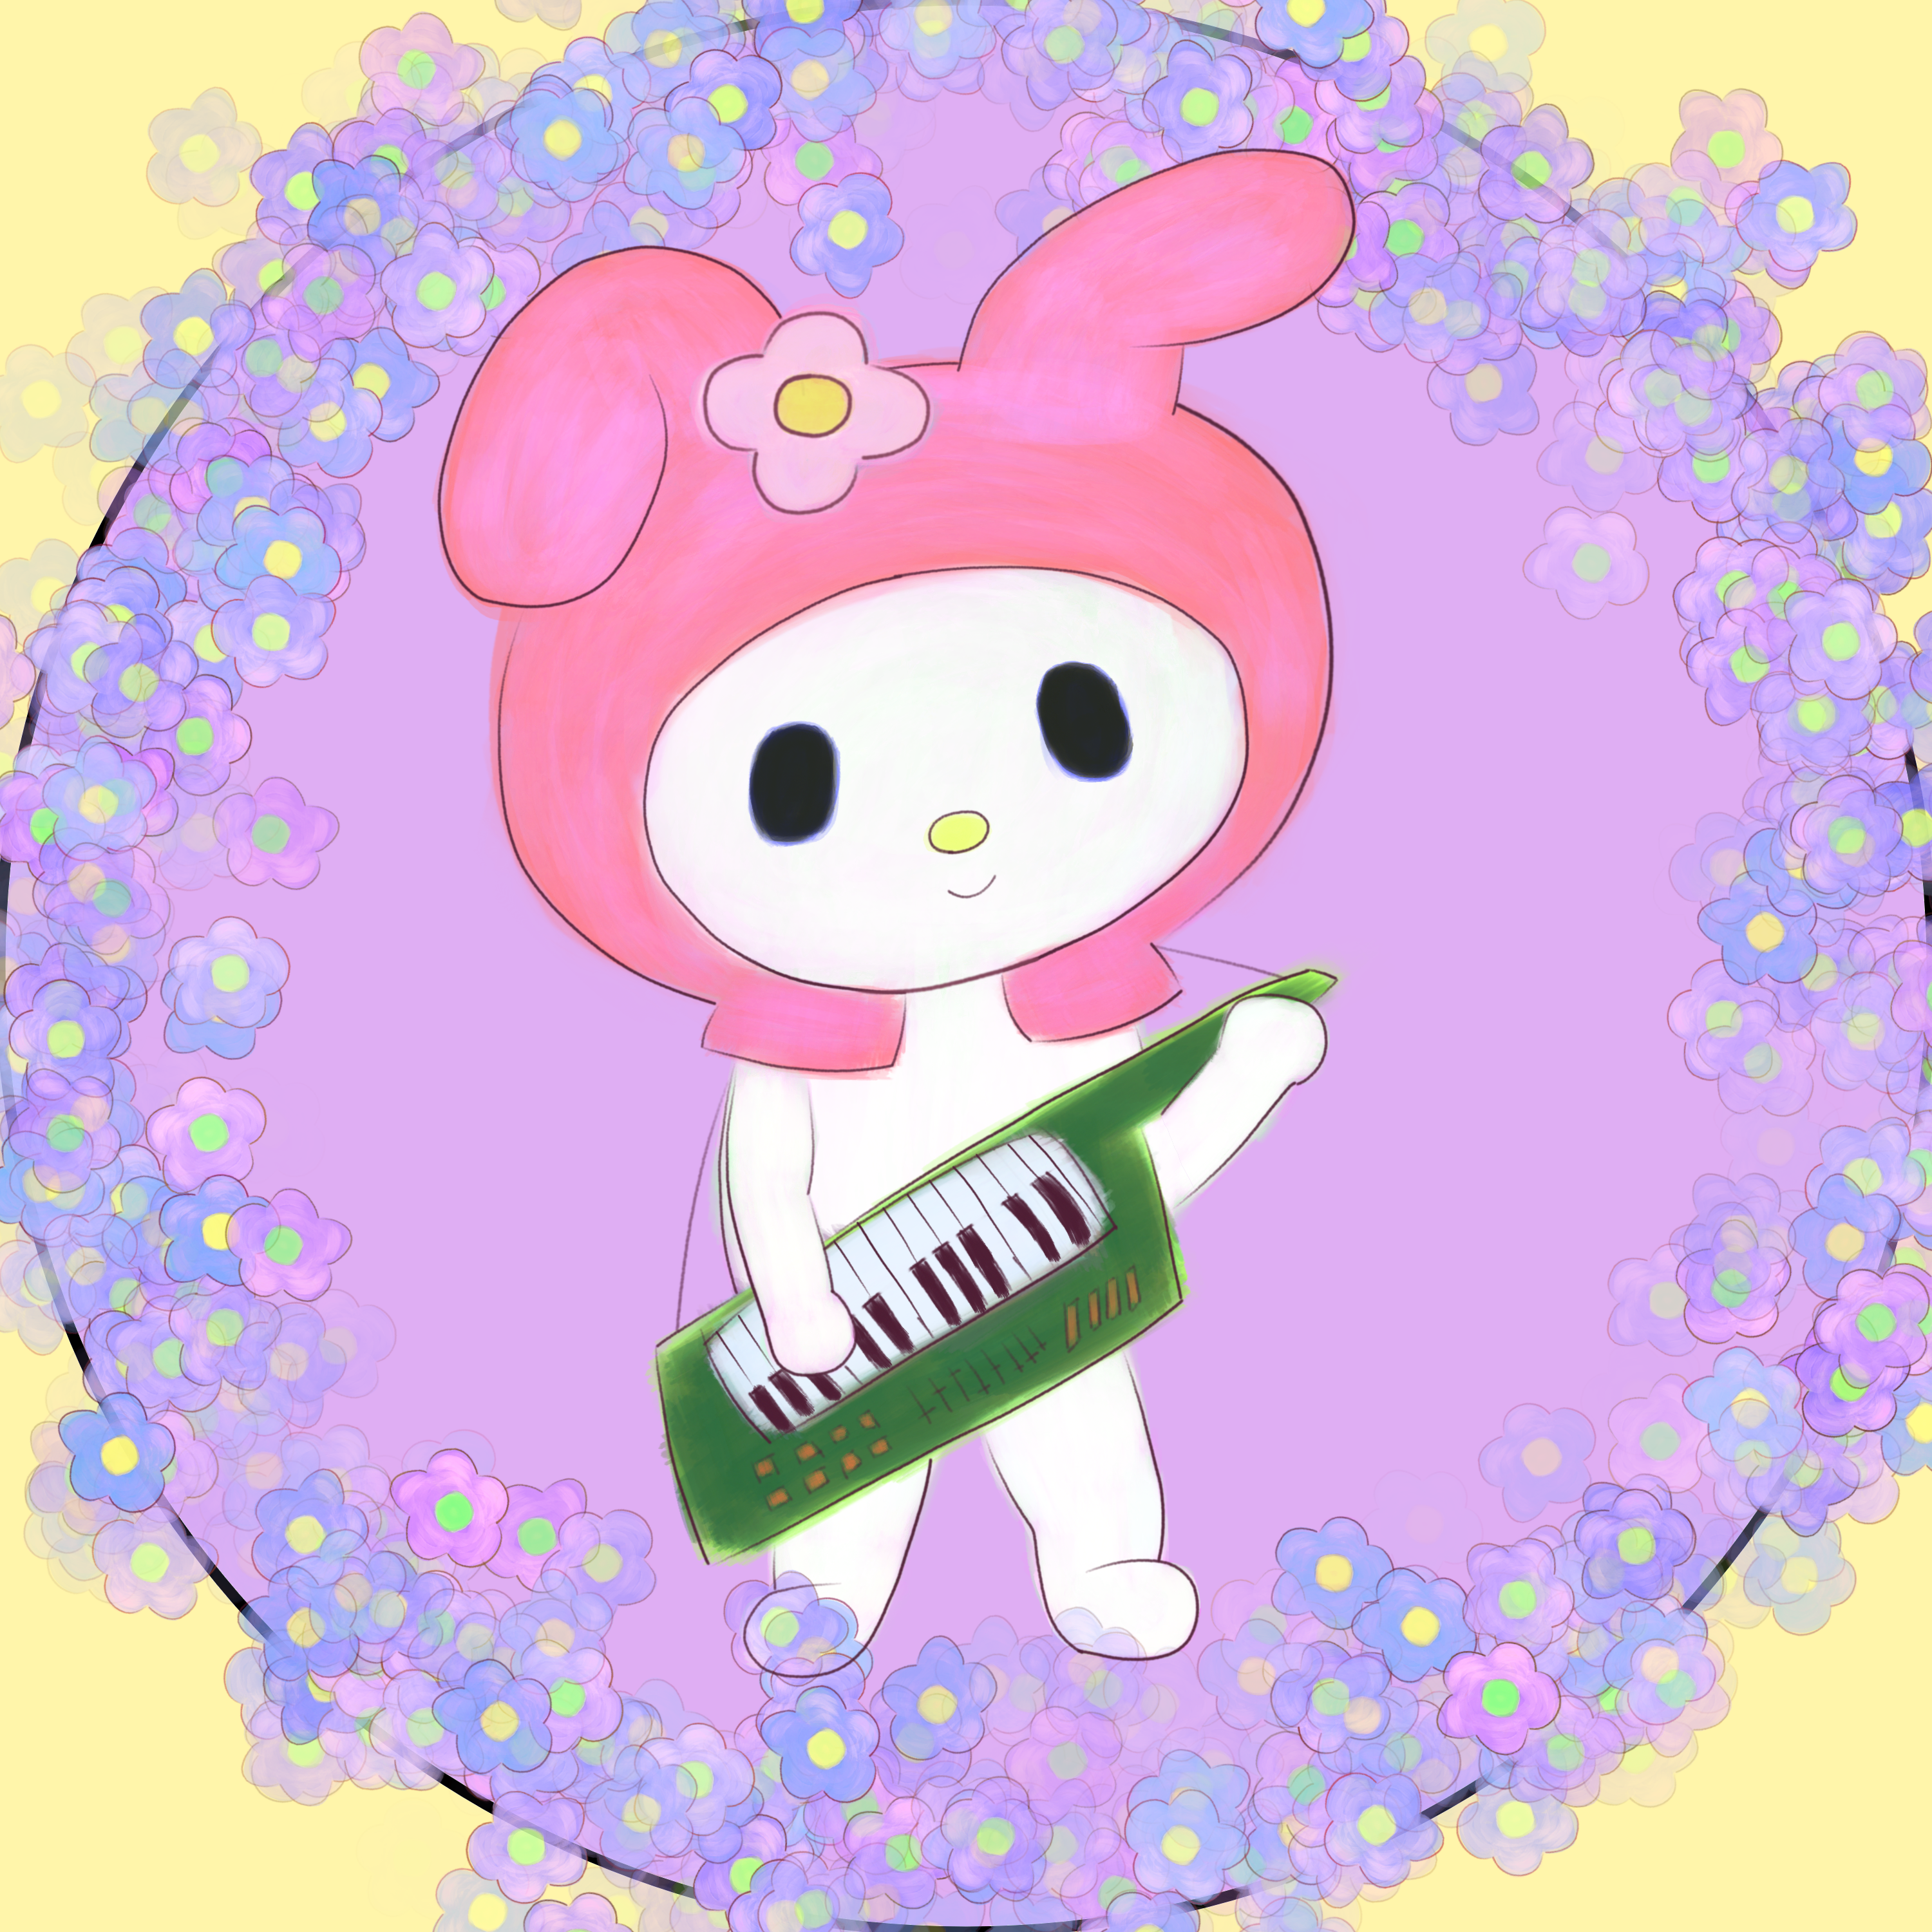 my melody fanart, one of my favourite characters. happy with how this one turned out